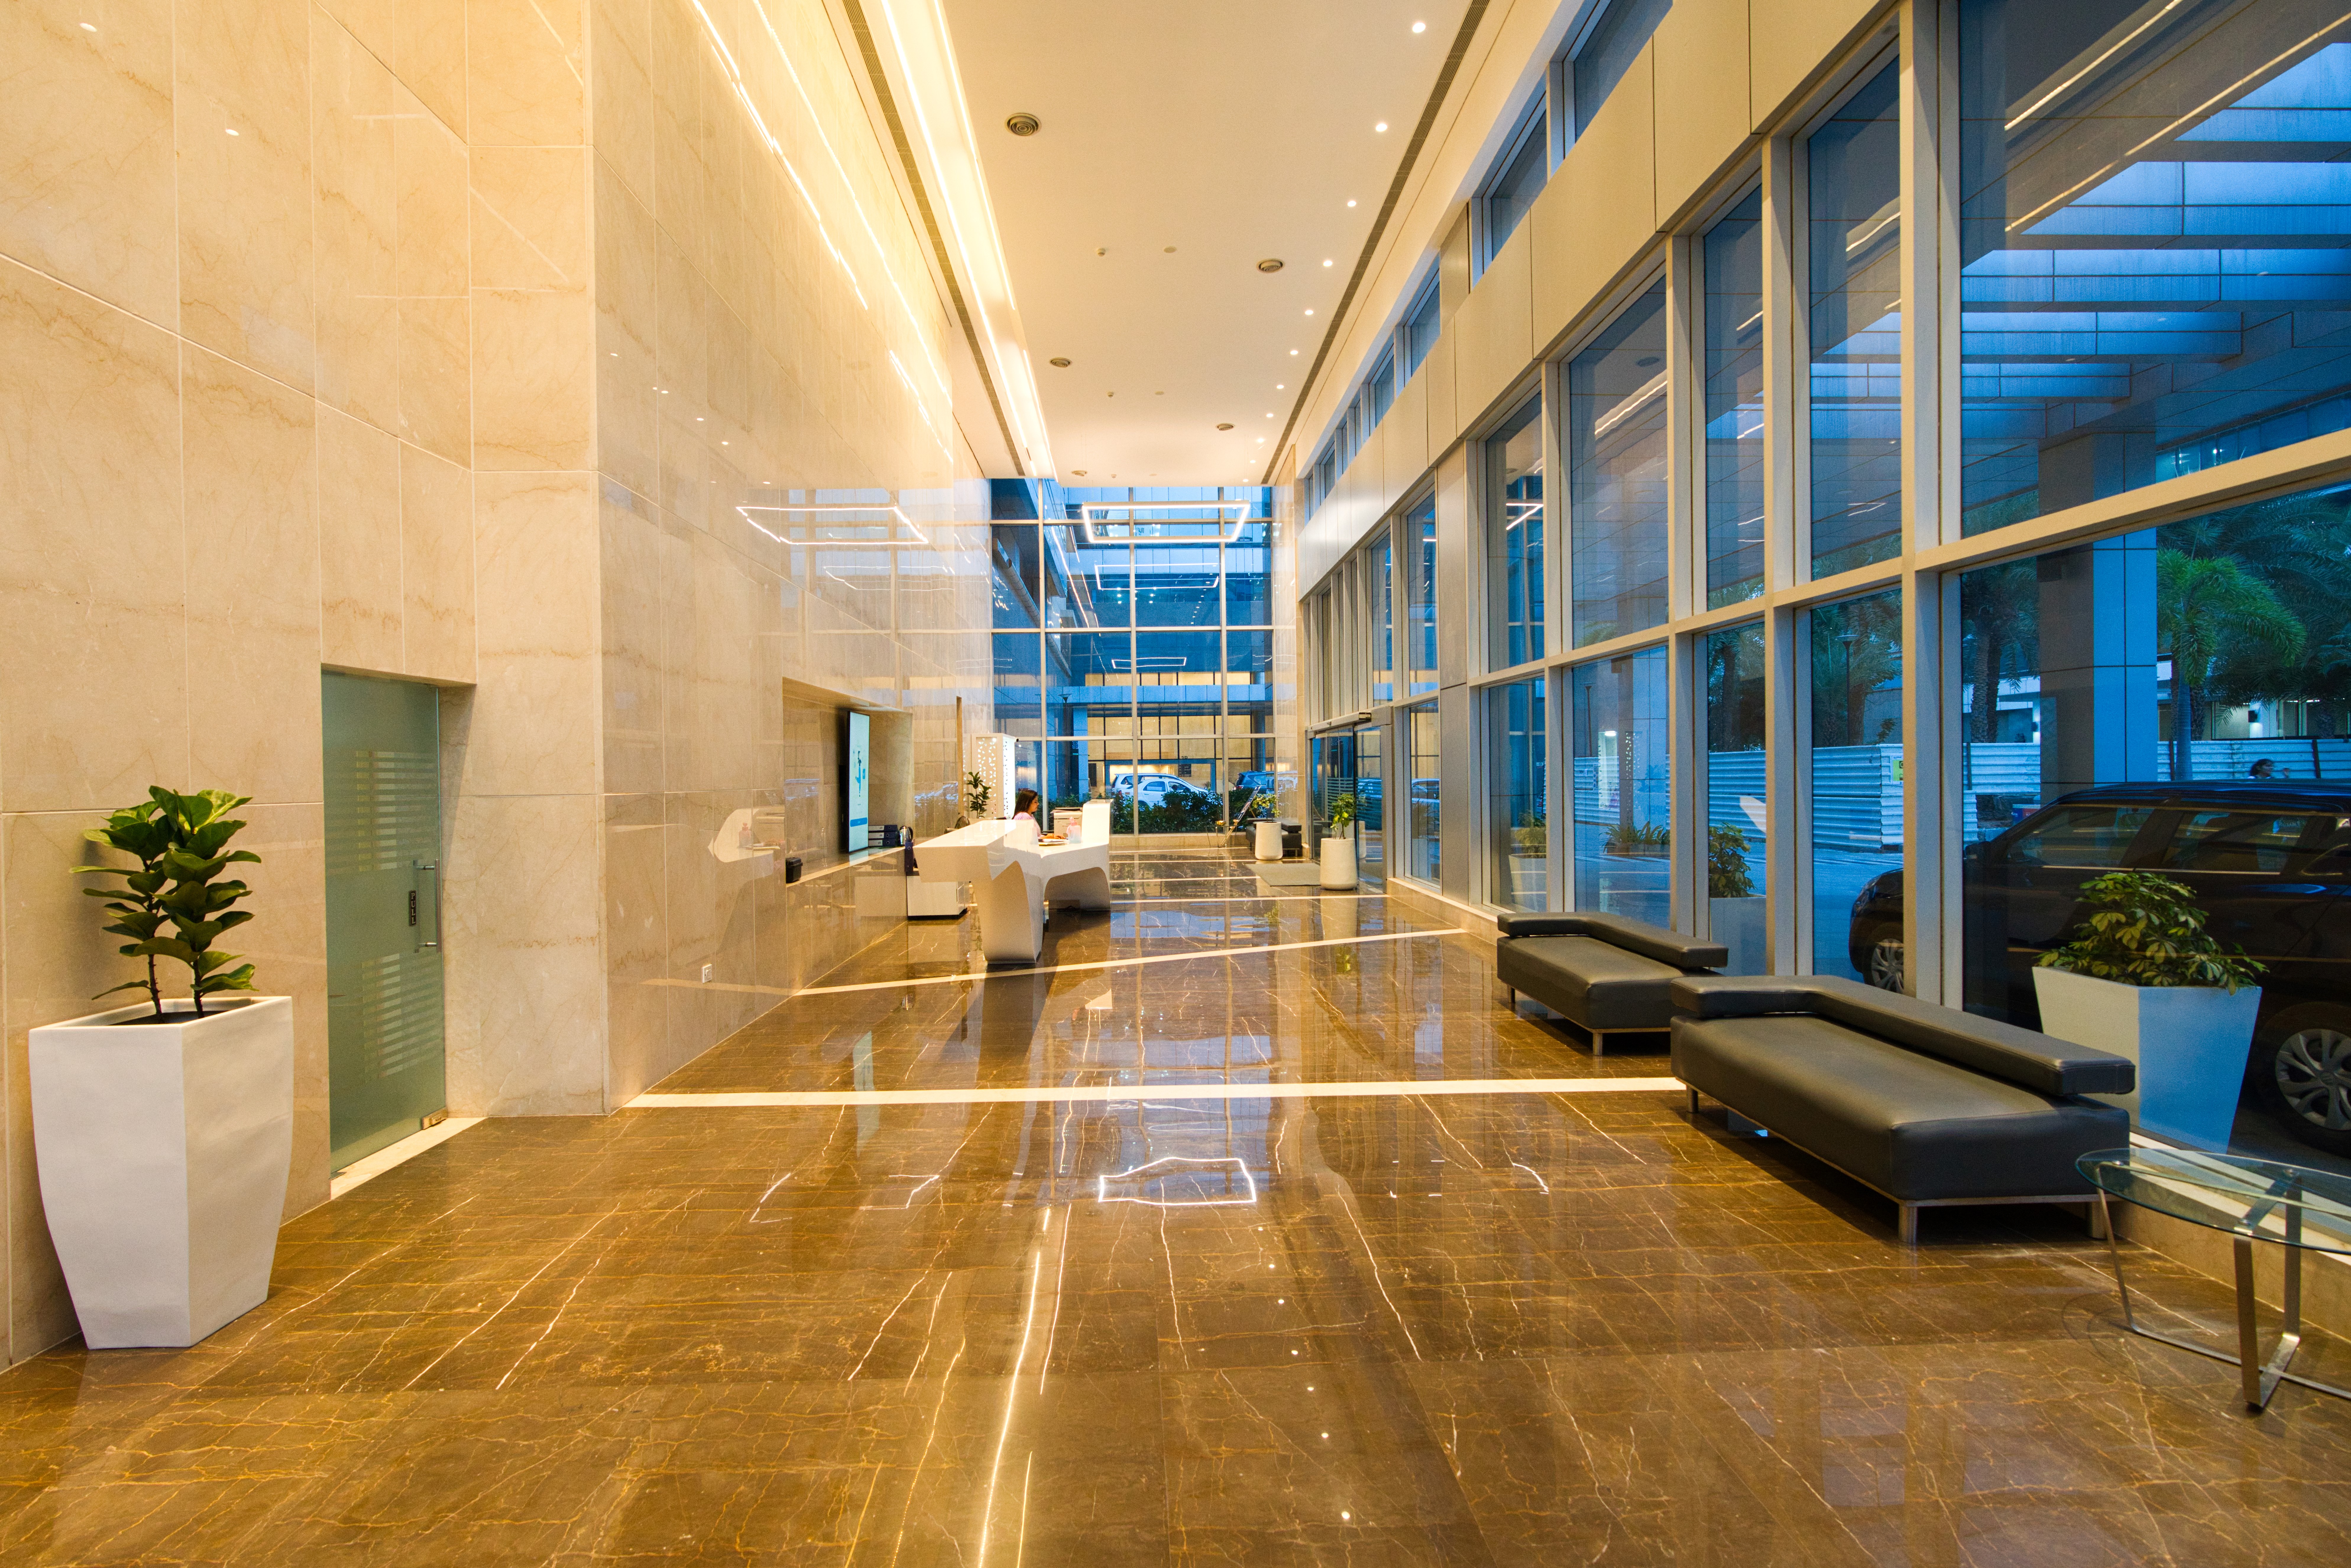 Lobby corridor at dusk with soft seating benches